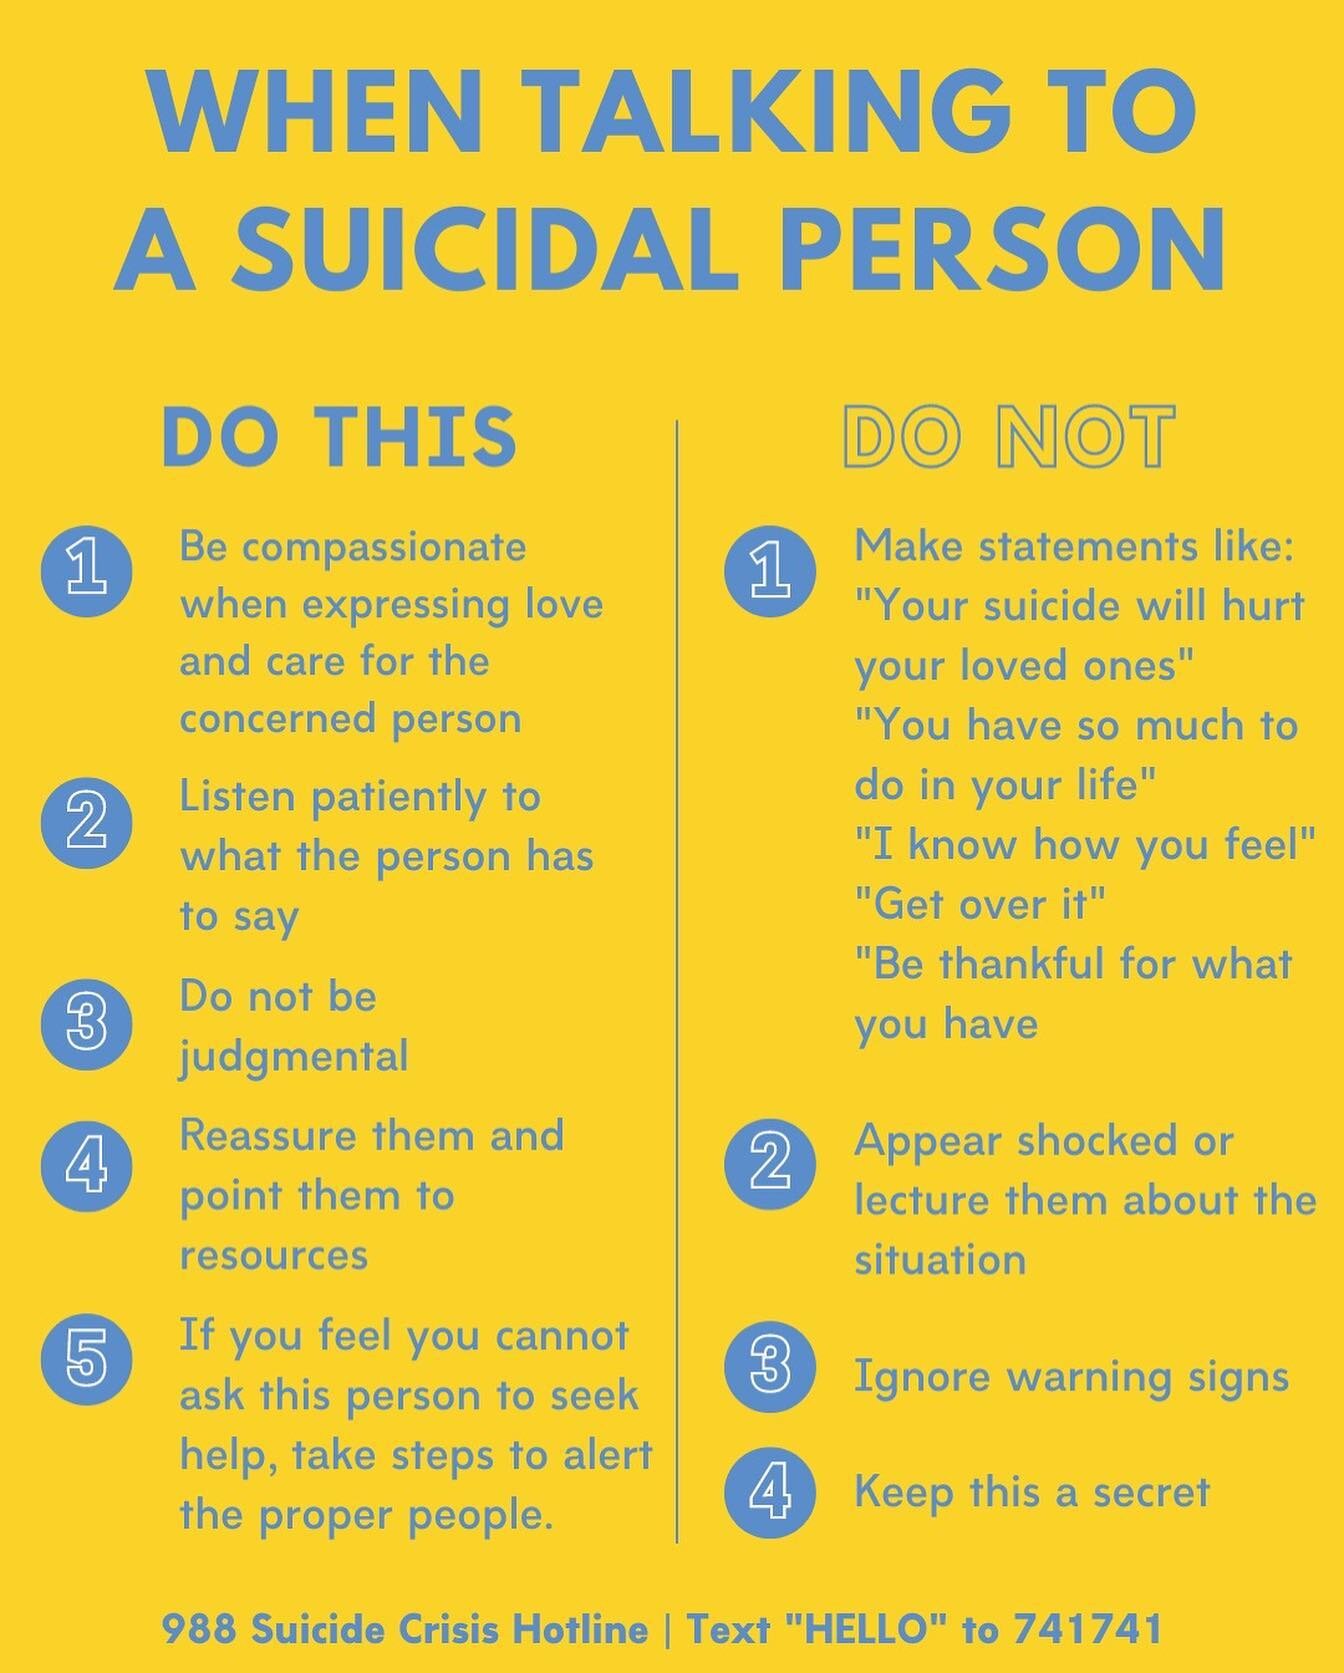 It is important to educate ourselves on the topic of Suicide Prevention🎗. Many of us may know a friend or family member that has expressed suicidal thoughts. How we respond in these situations is extremely important. Here are some dos and don'ts whe